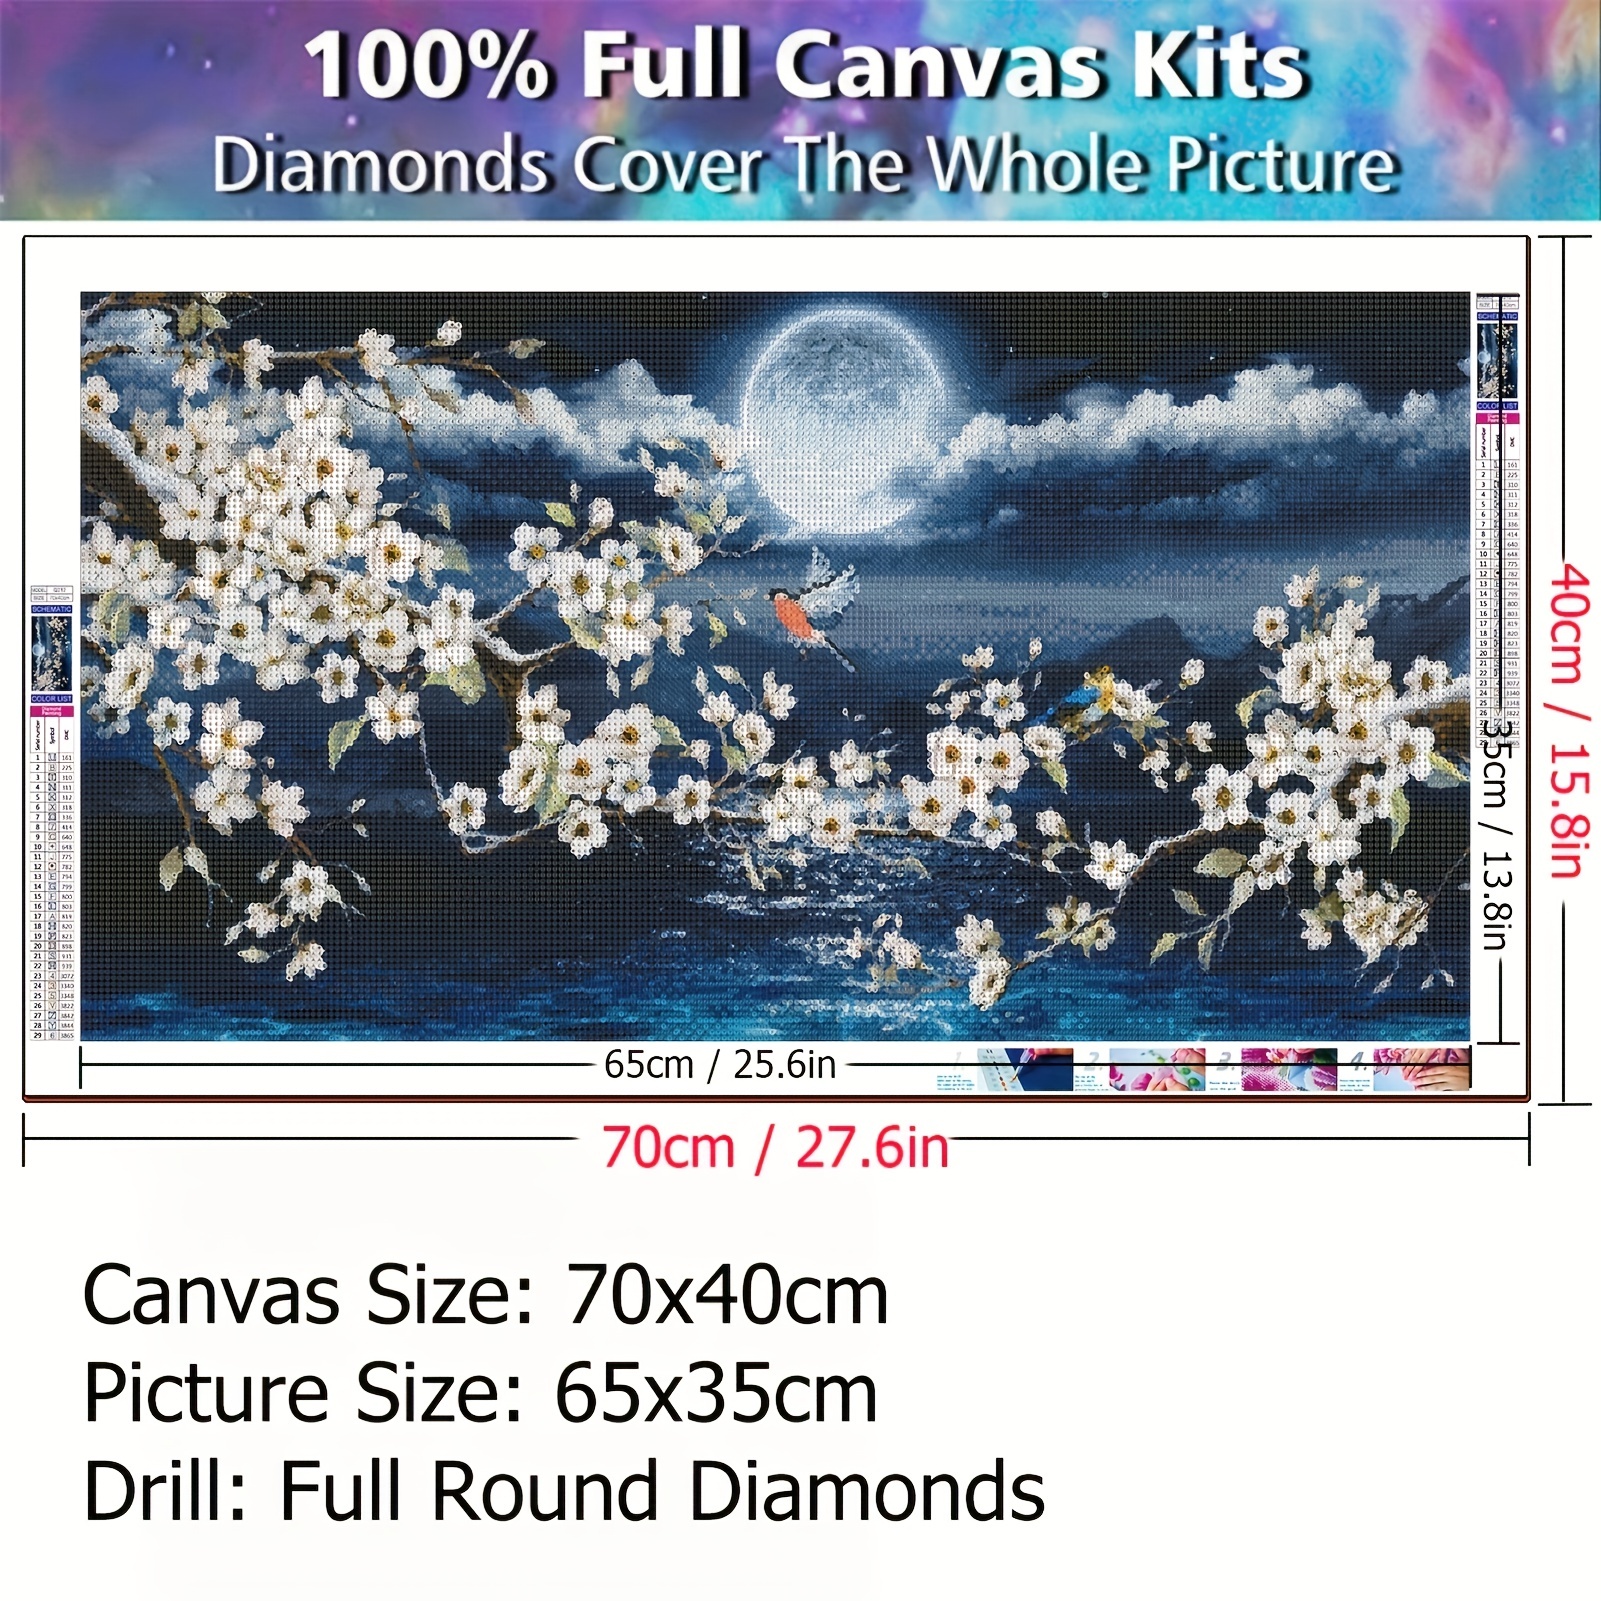 YALKIN 5D Diamond Painting Kits for Adults, DIY Full Round Drill Large Diamond Art Kits Crystal Rhinestion Arts and Crafts, Gem Arts Paints with